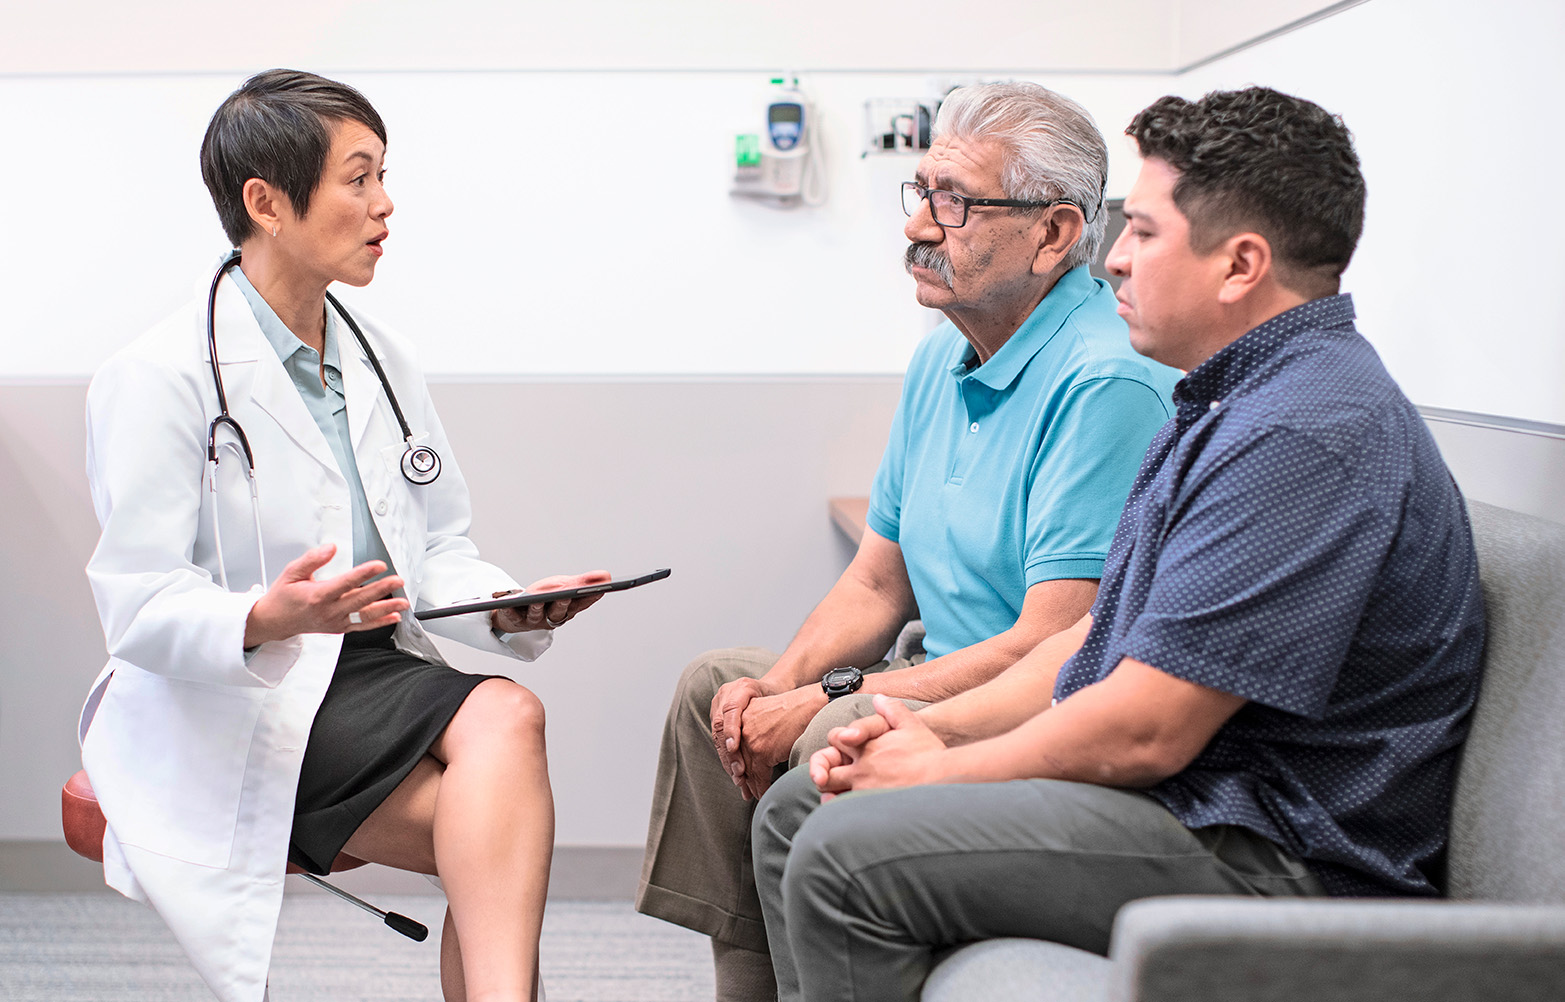 Female-presenting Asian doctor sits across from two male-presenting patients, a middle-aged person and an older person.